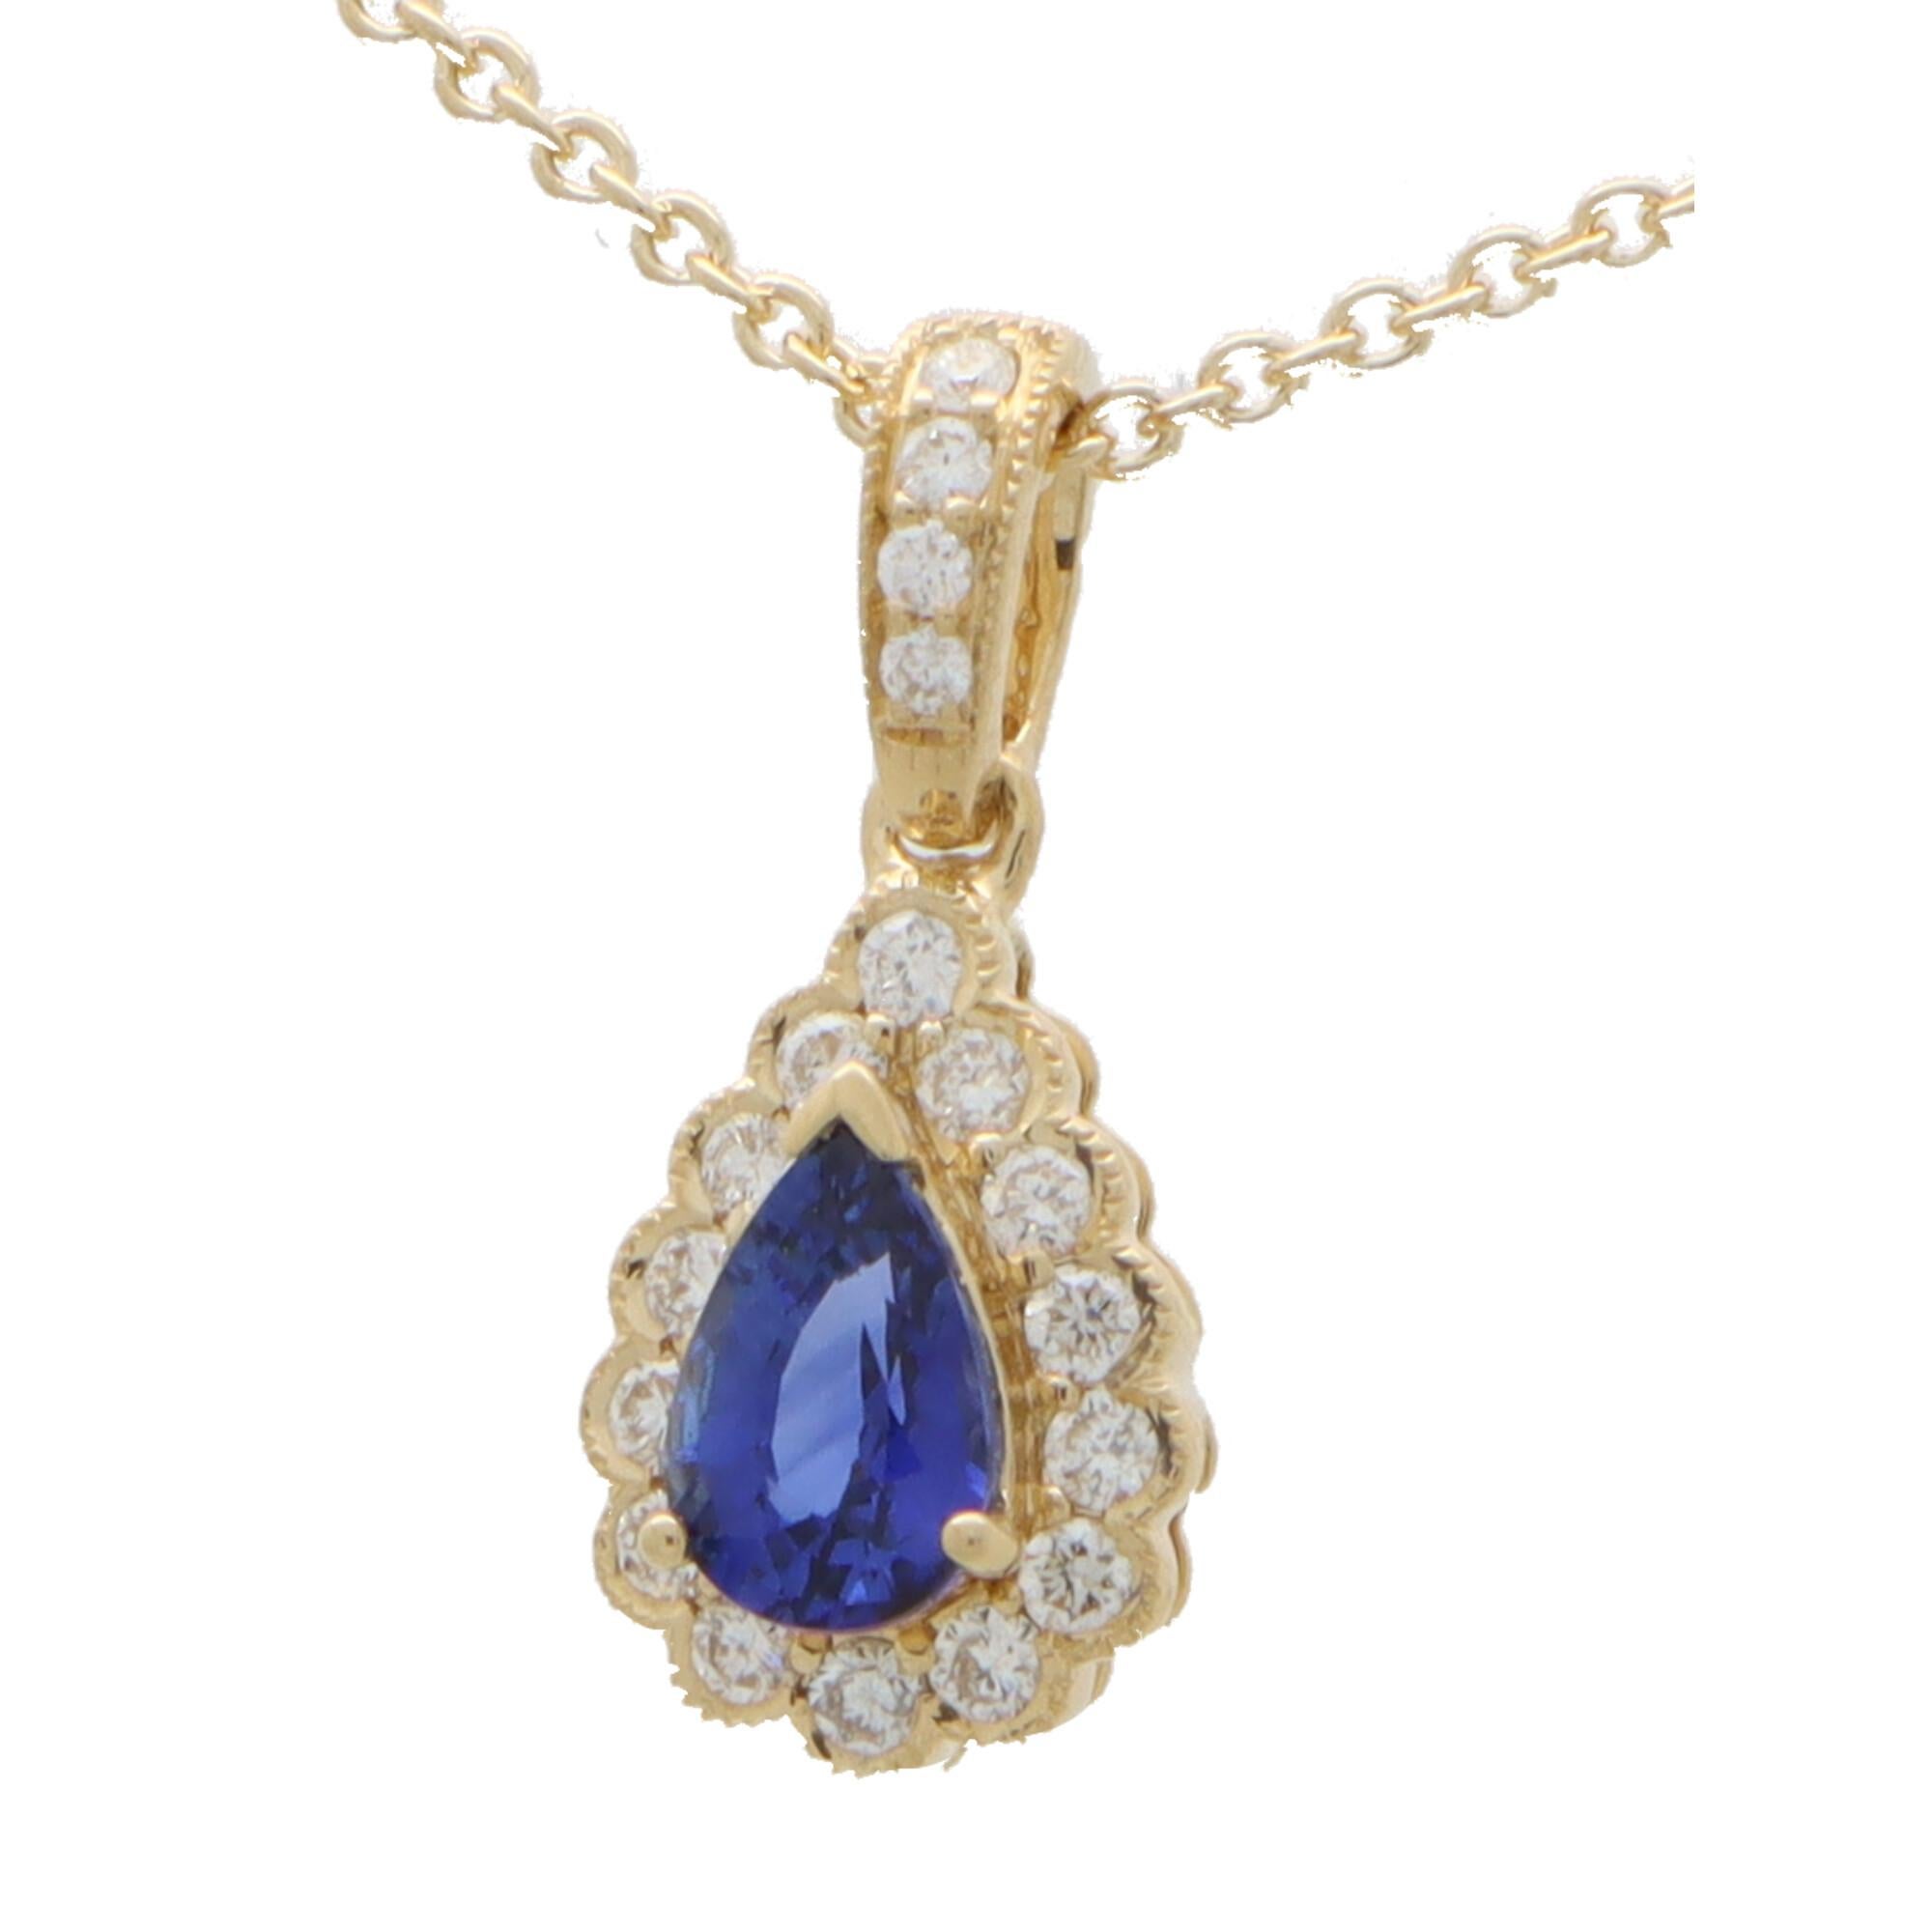  A beautiful little sapphire and diamond cluster pendant set in 18k yellow gold.


The pendant is centrally set with a beautiful coloured blue pear cut sapphire which is surrounded by 14 sparkly round brilliant cut diamonds. The pendant hangs from a